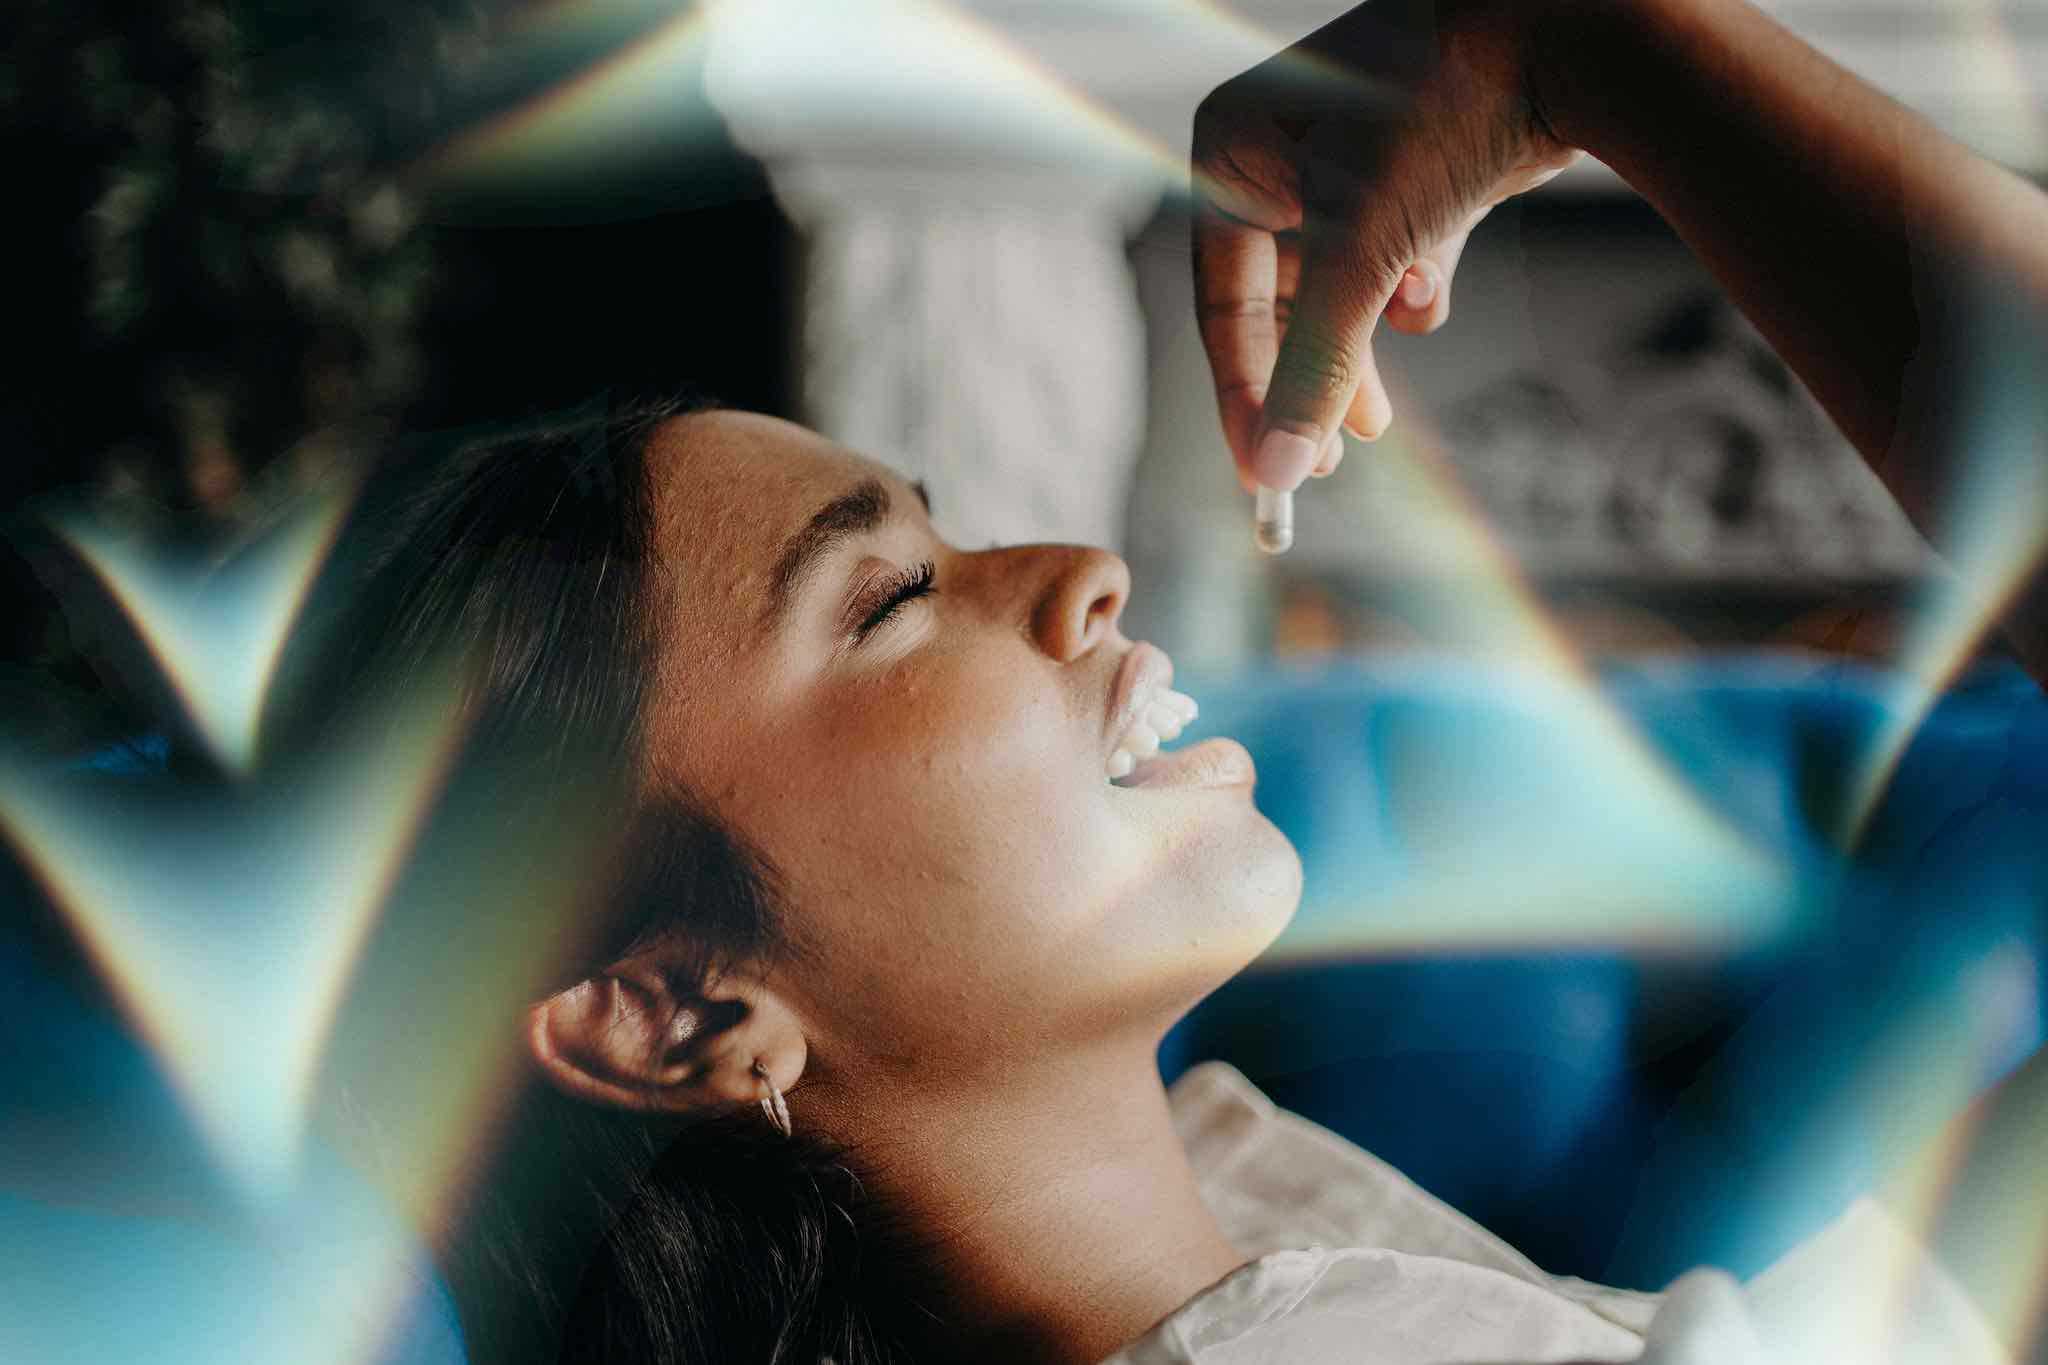 Featured Image: What Kind of Therapy is Used in Psychedelic Medicine?